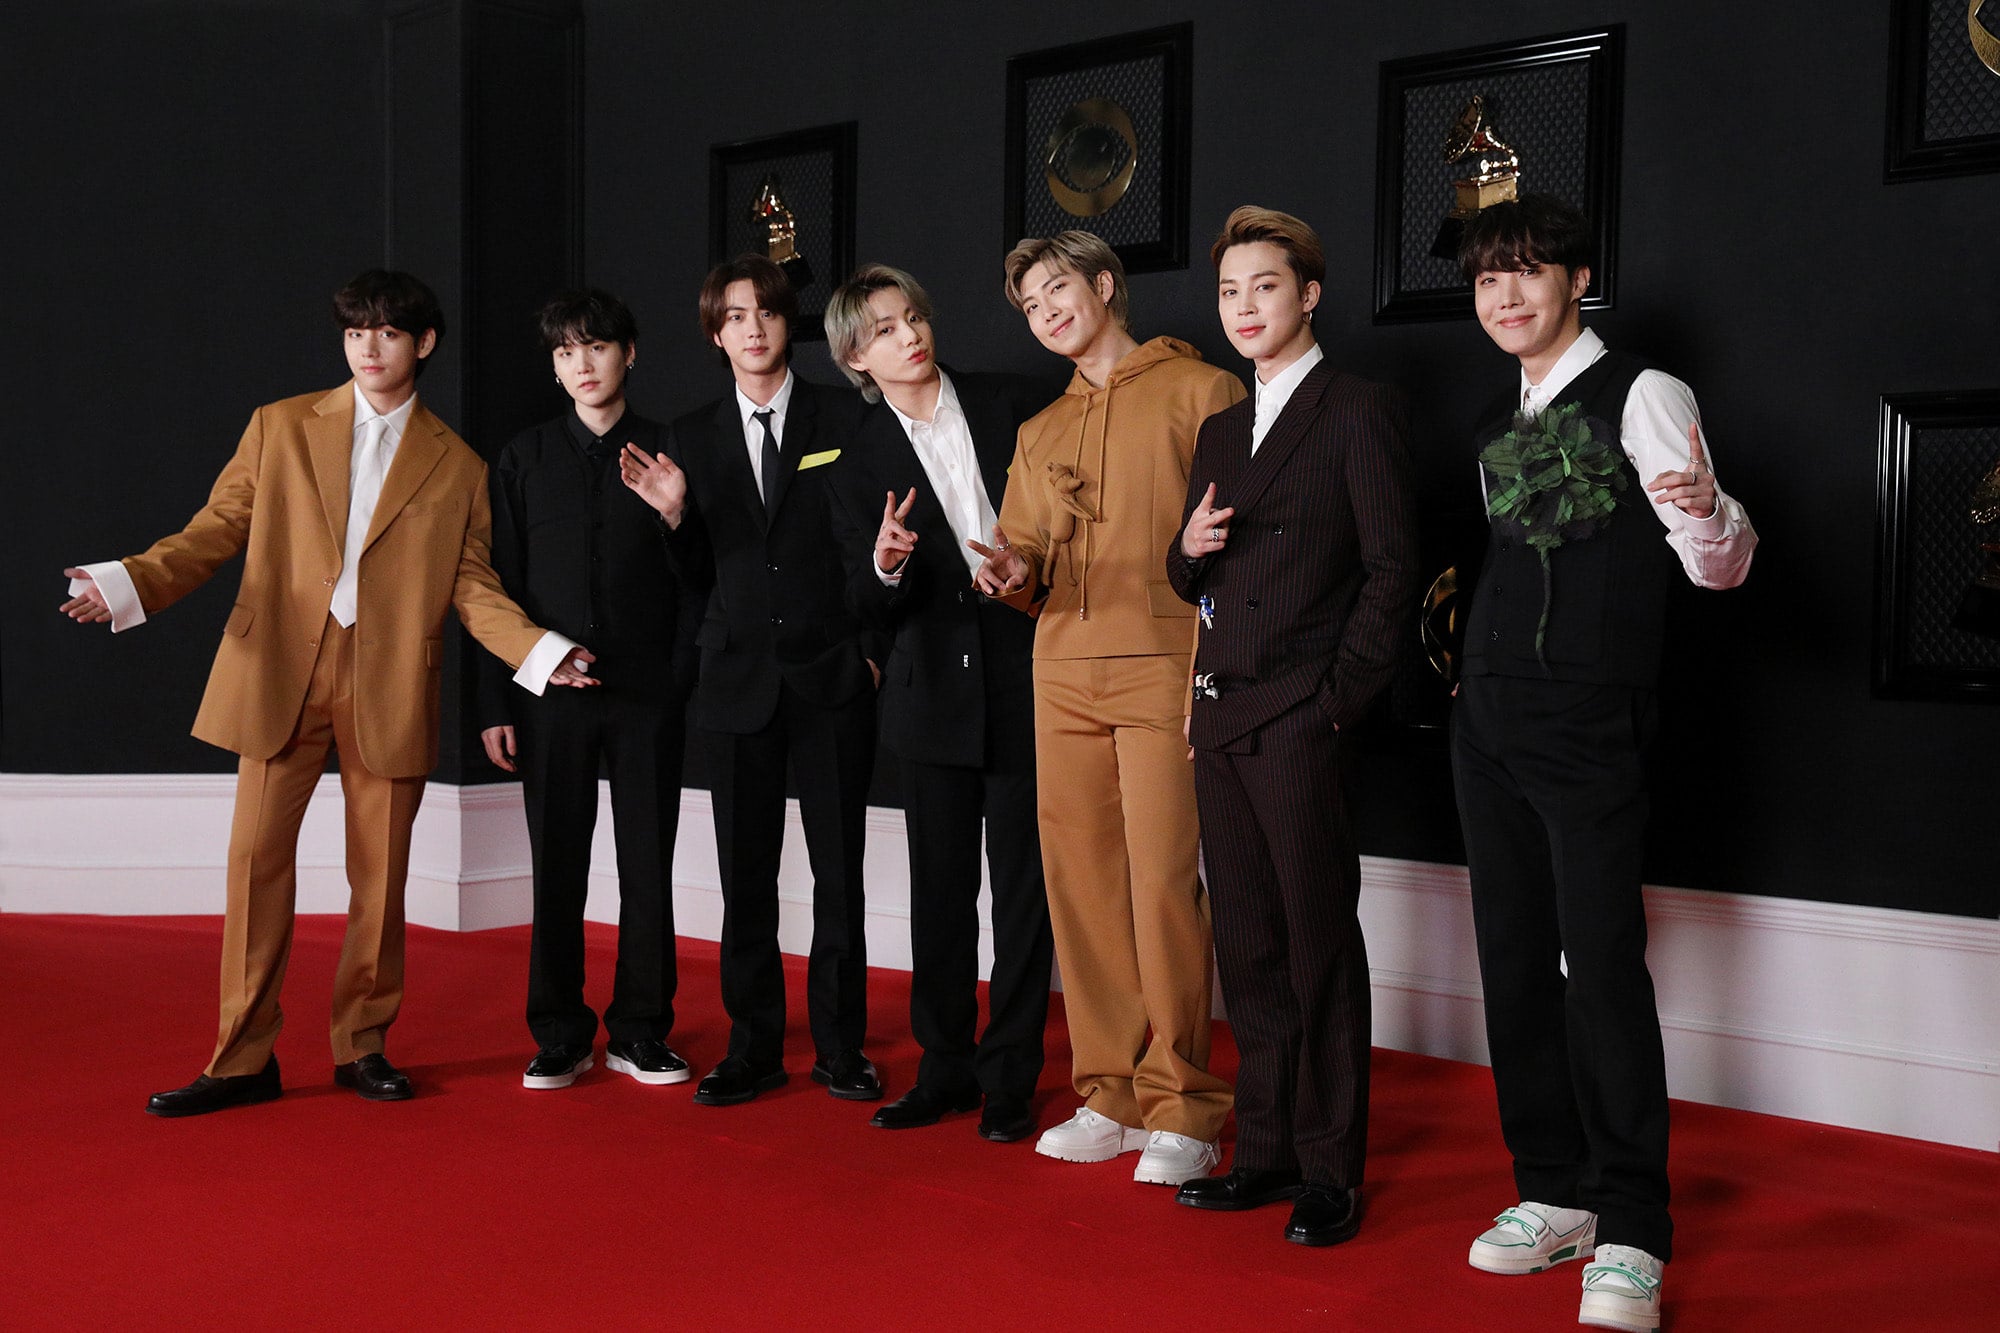 Worn Only Once, Louis Vuitton Clothes For BTS Will Be Auctioned